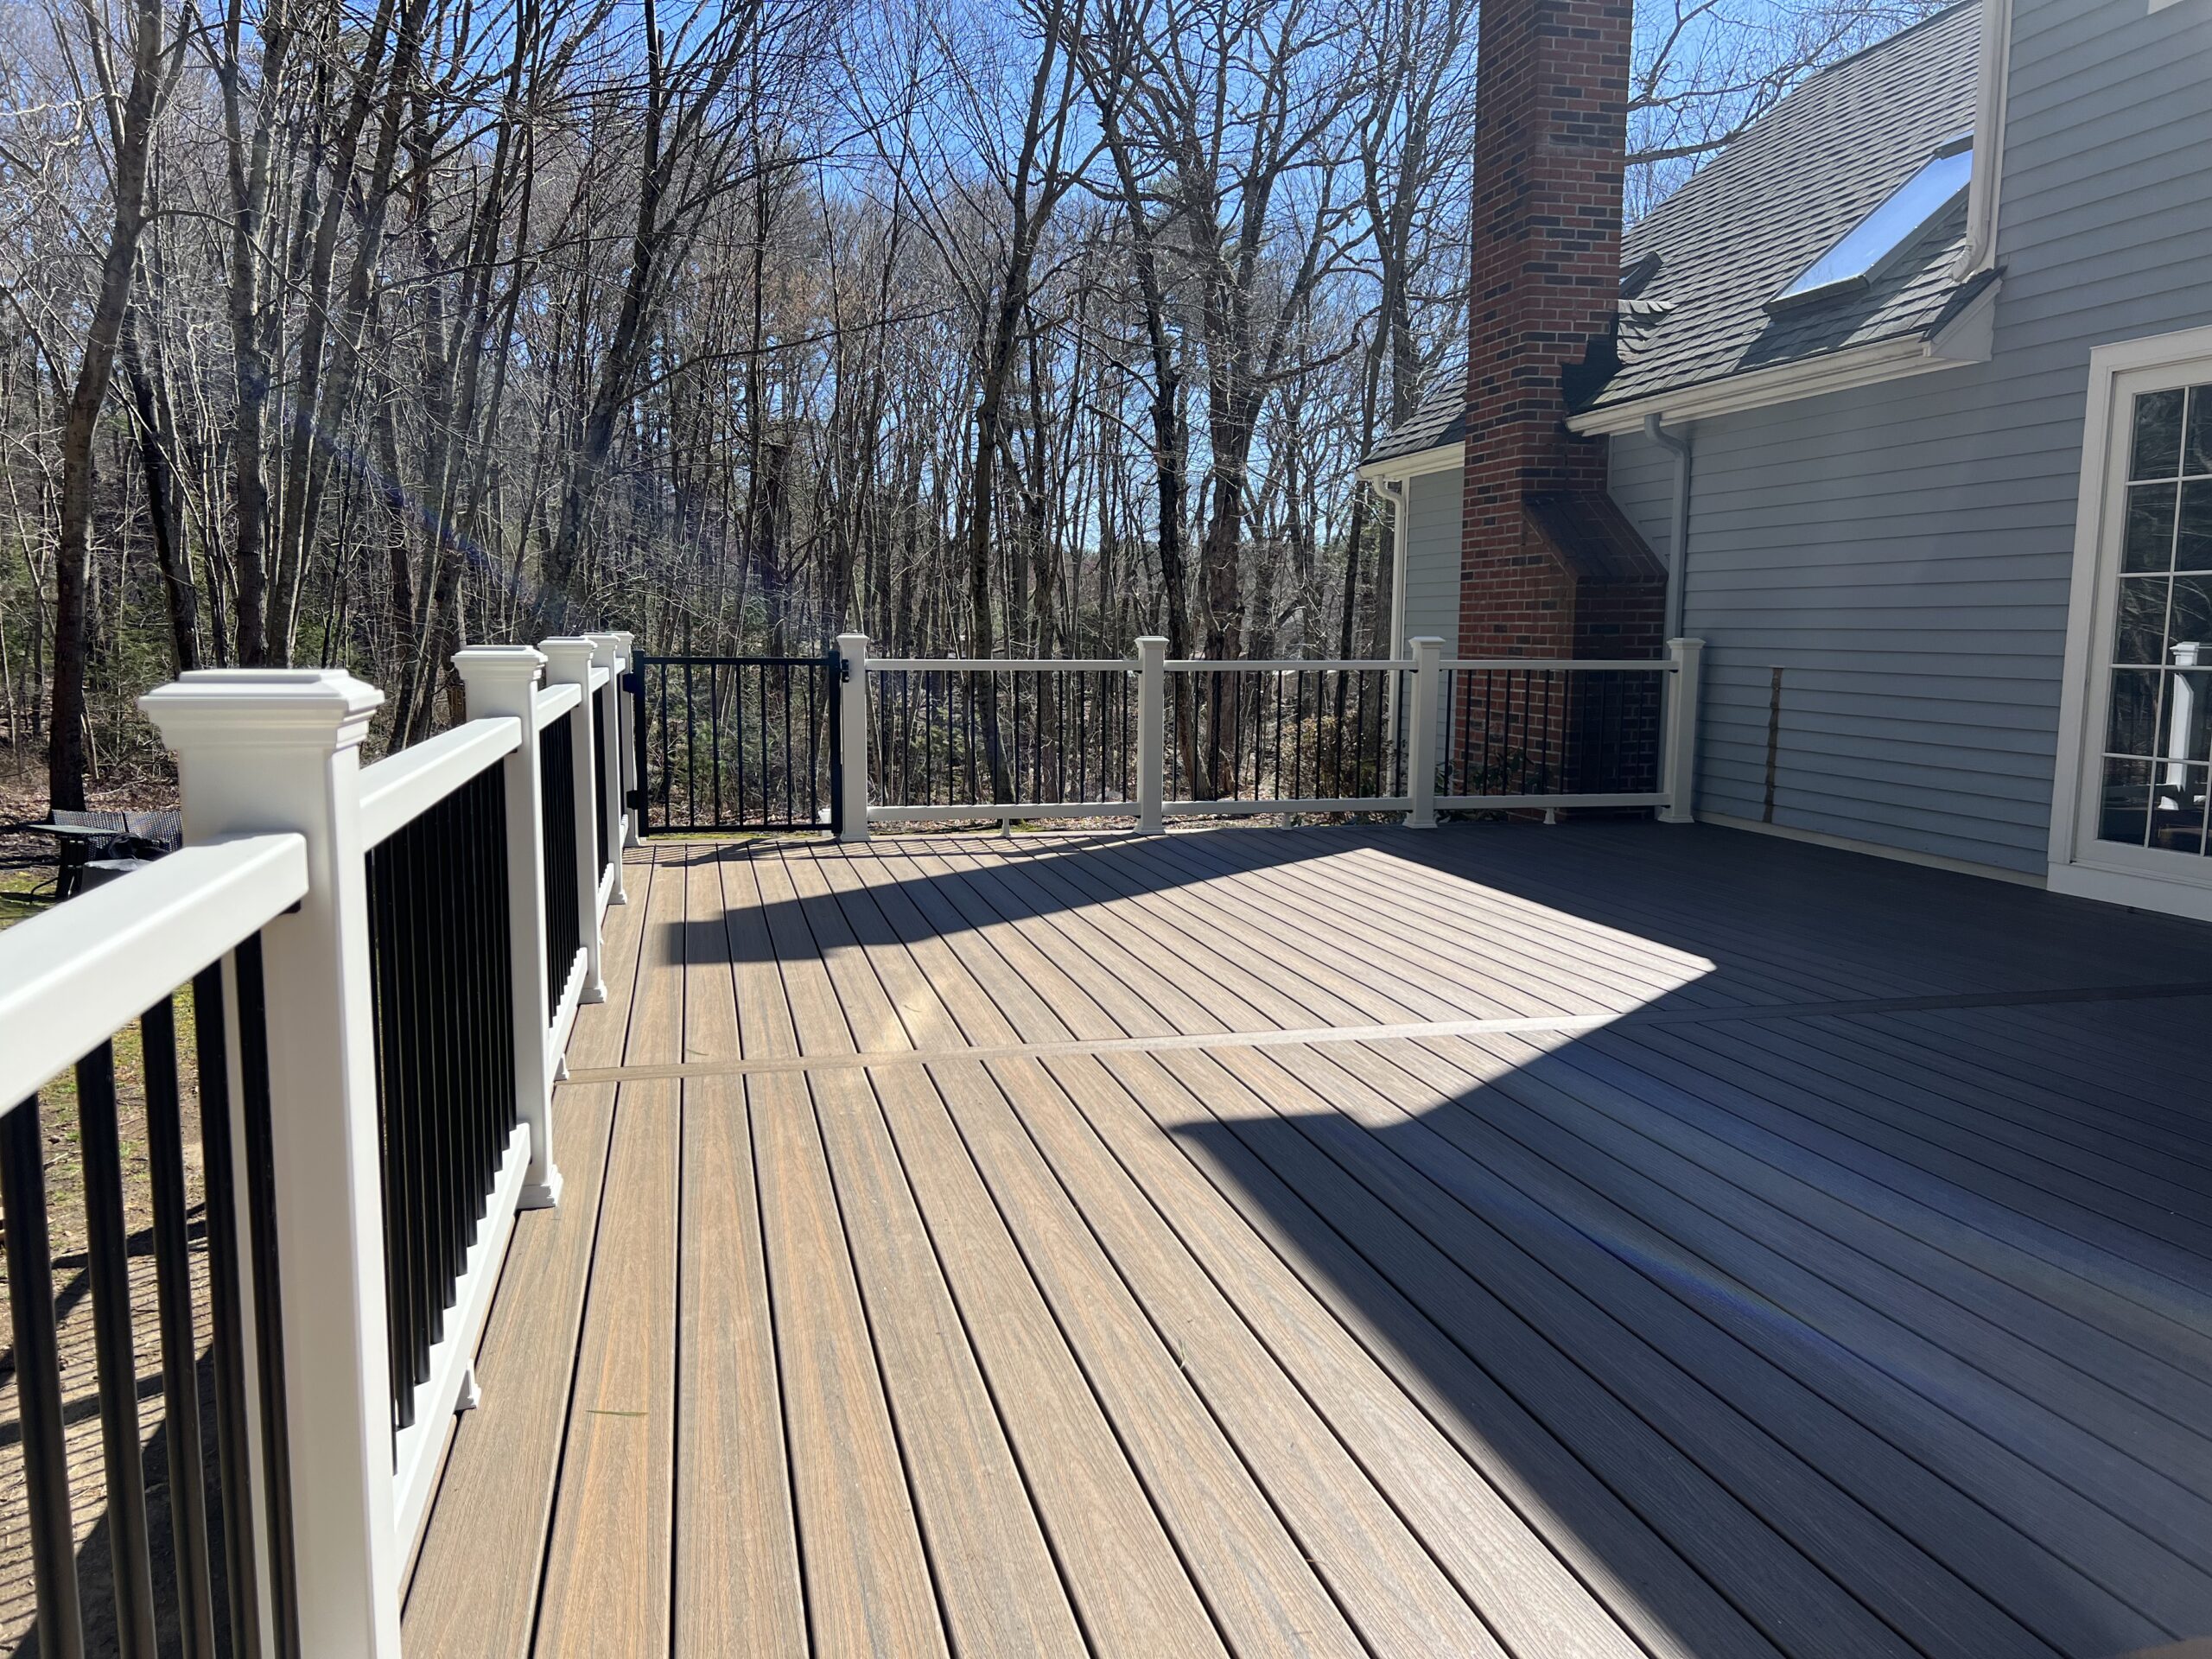 Trex deck with Toasted sand decking and white r railings. Upton MA Deck